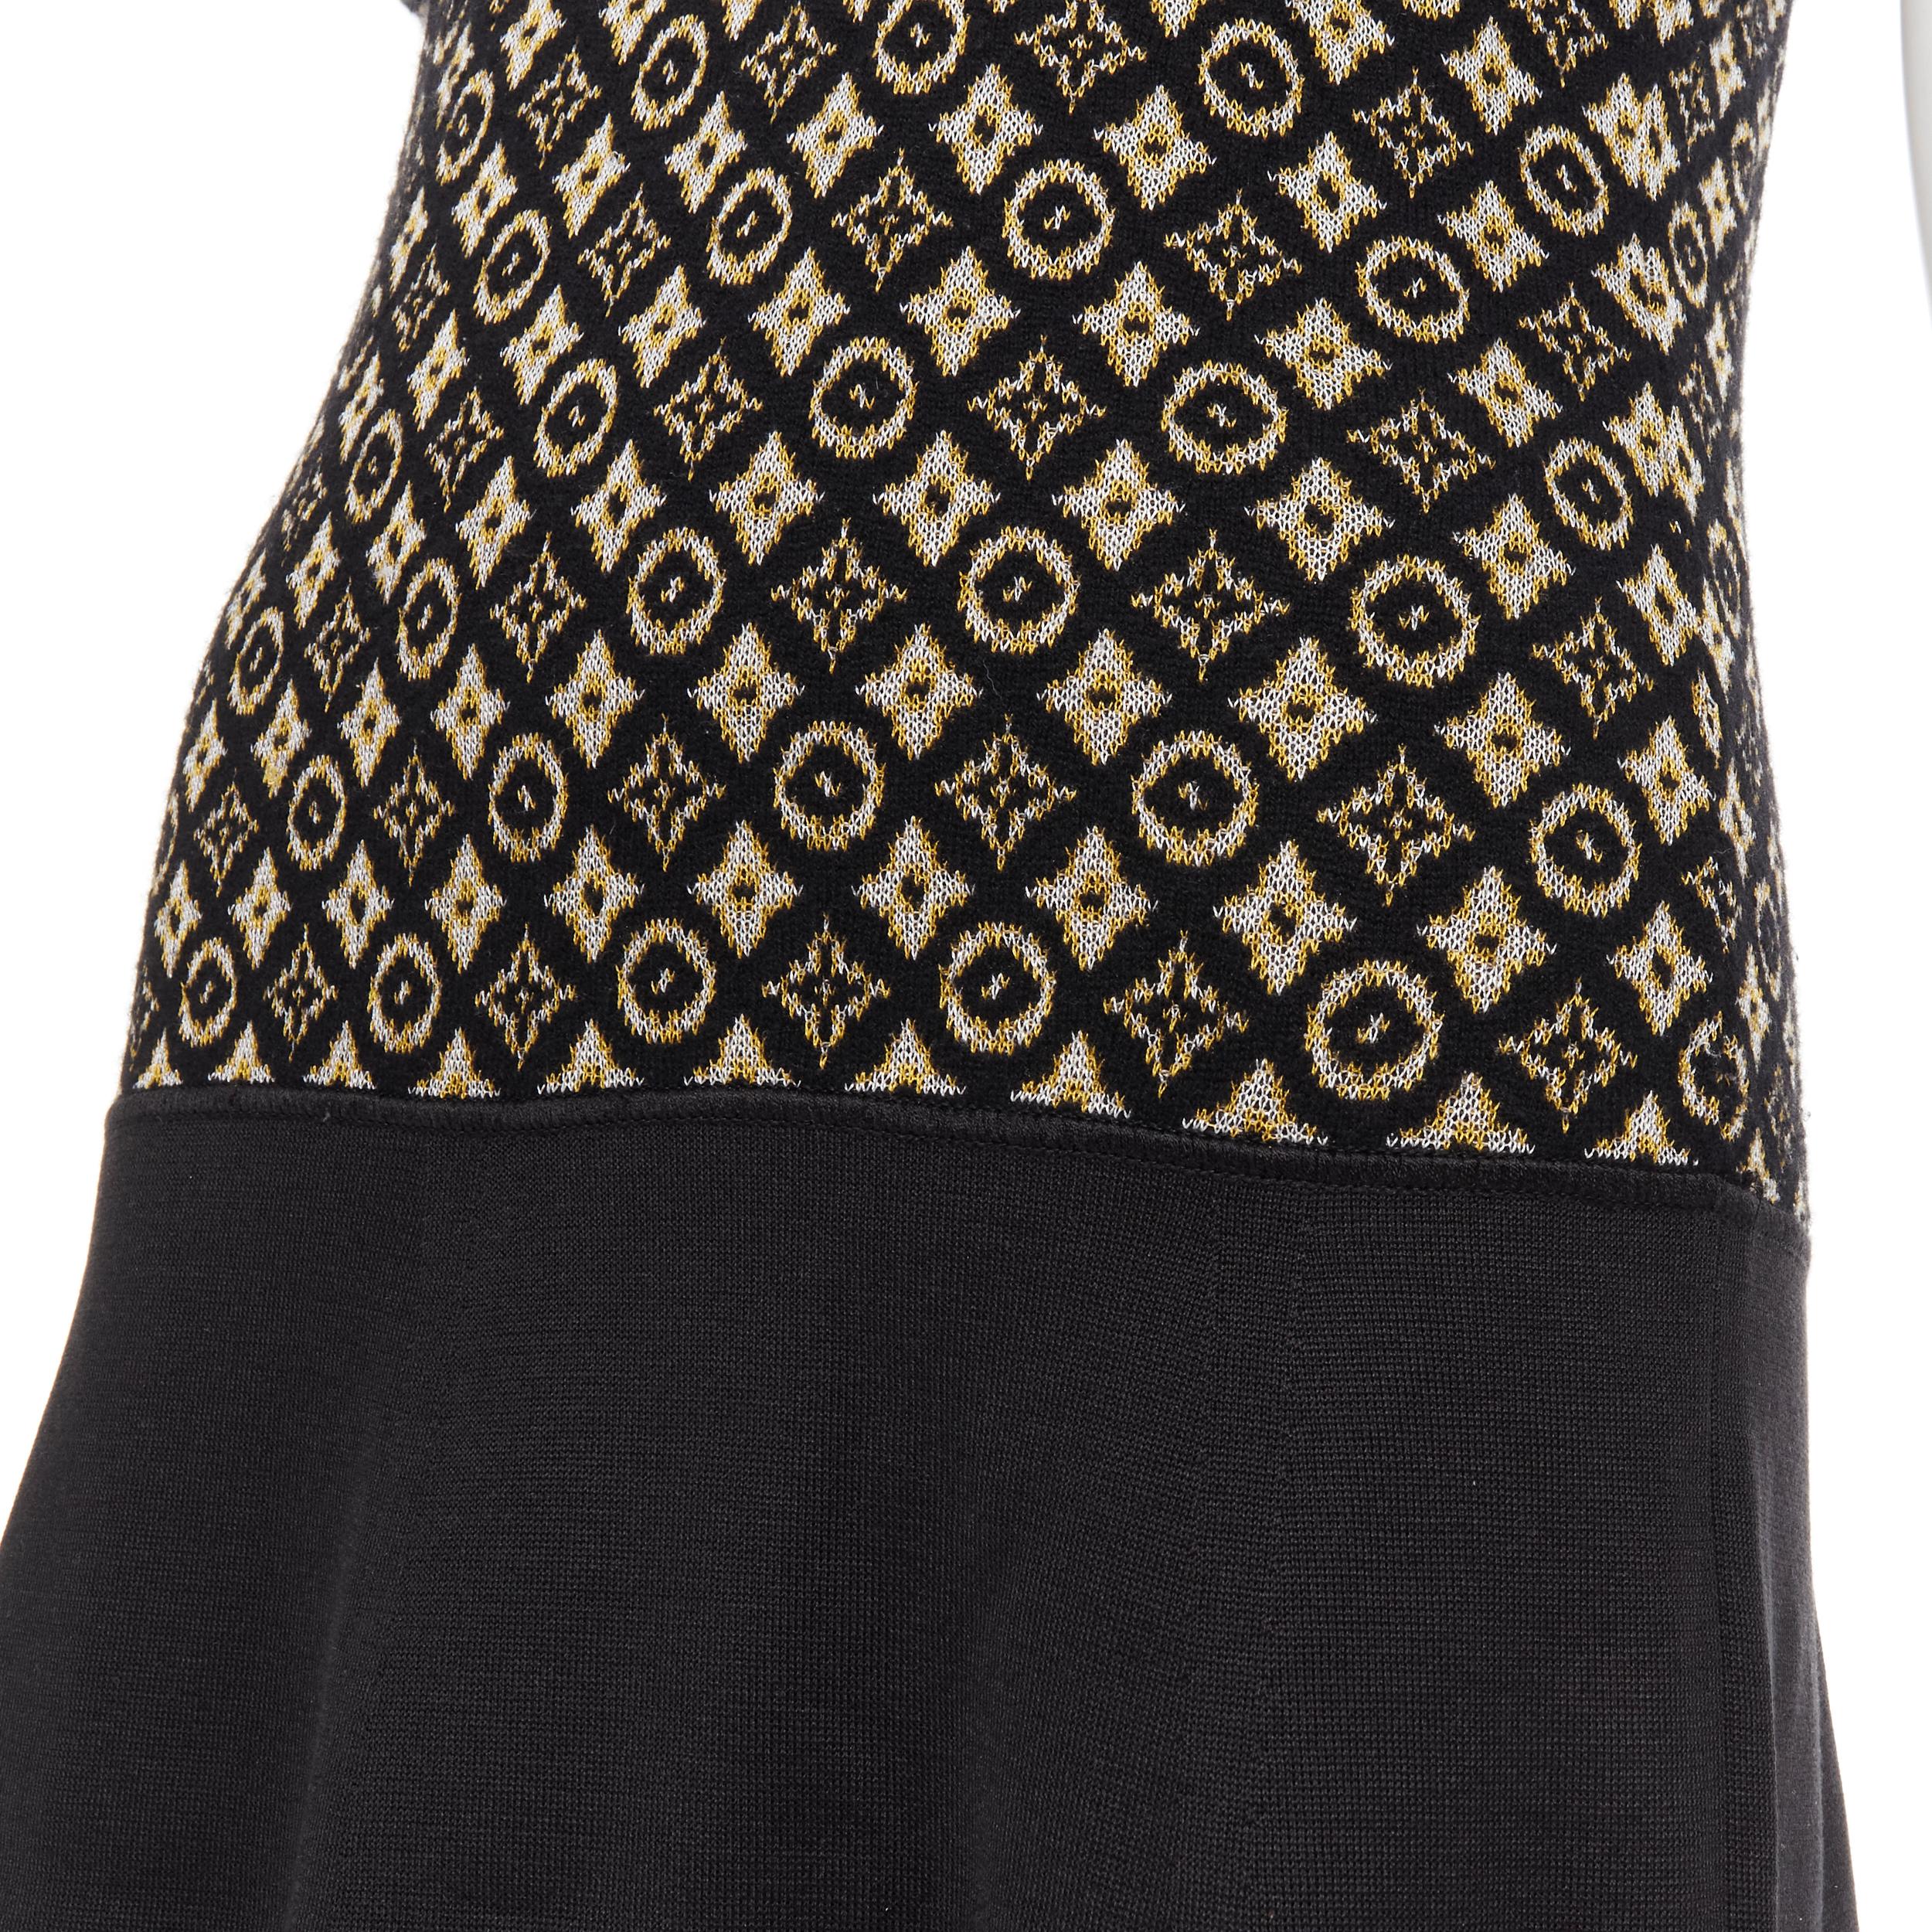 LOUIS VUITTON monogram silk cashmere knitted black stretch casual dress S 3